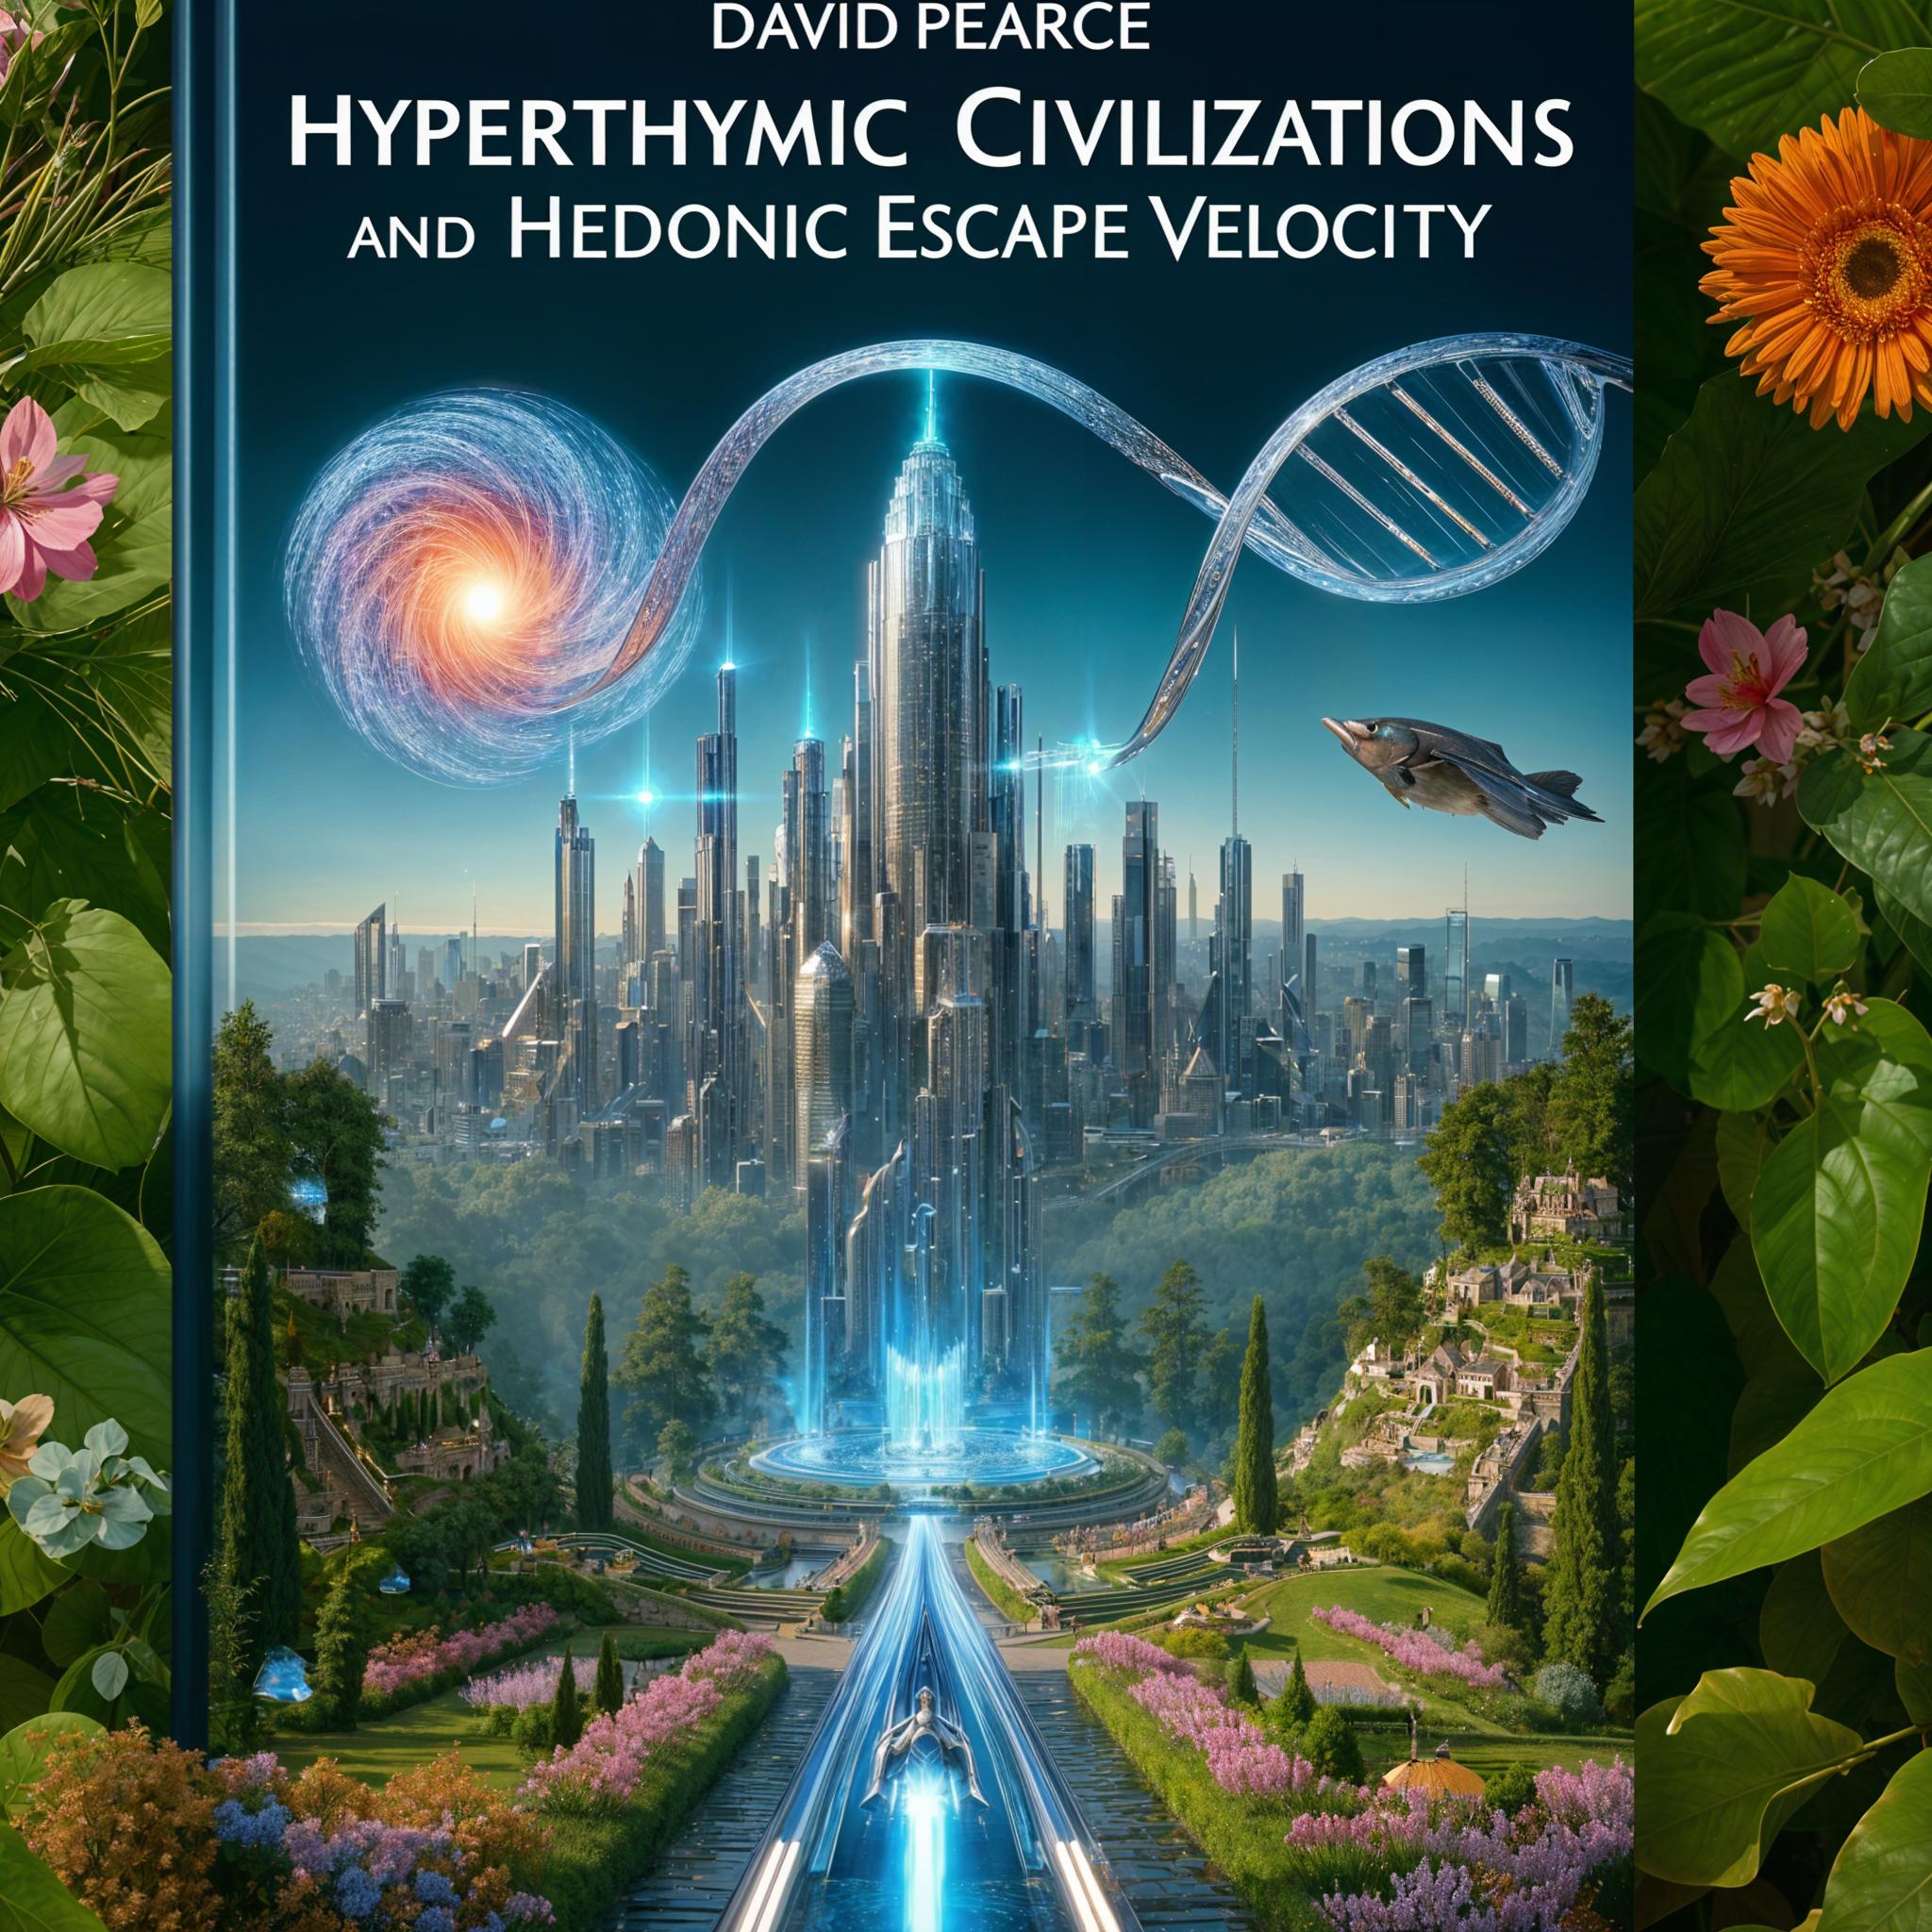 Hyperthymic Civilizations and Hedonic Escape Velocity by David Pearce